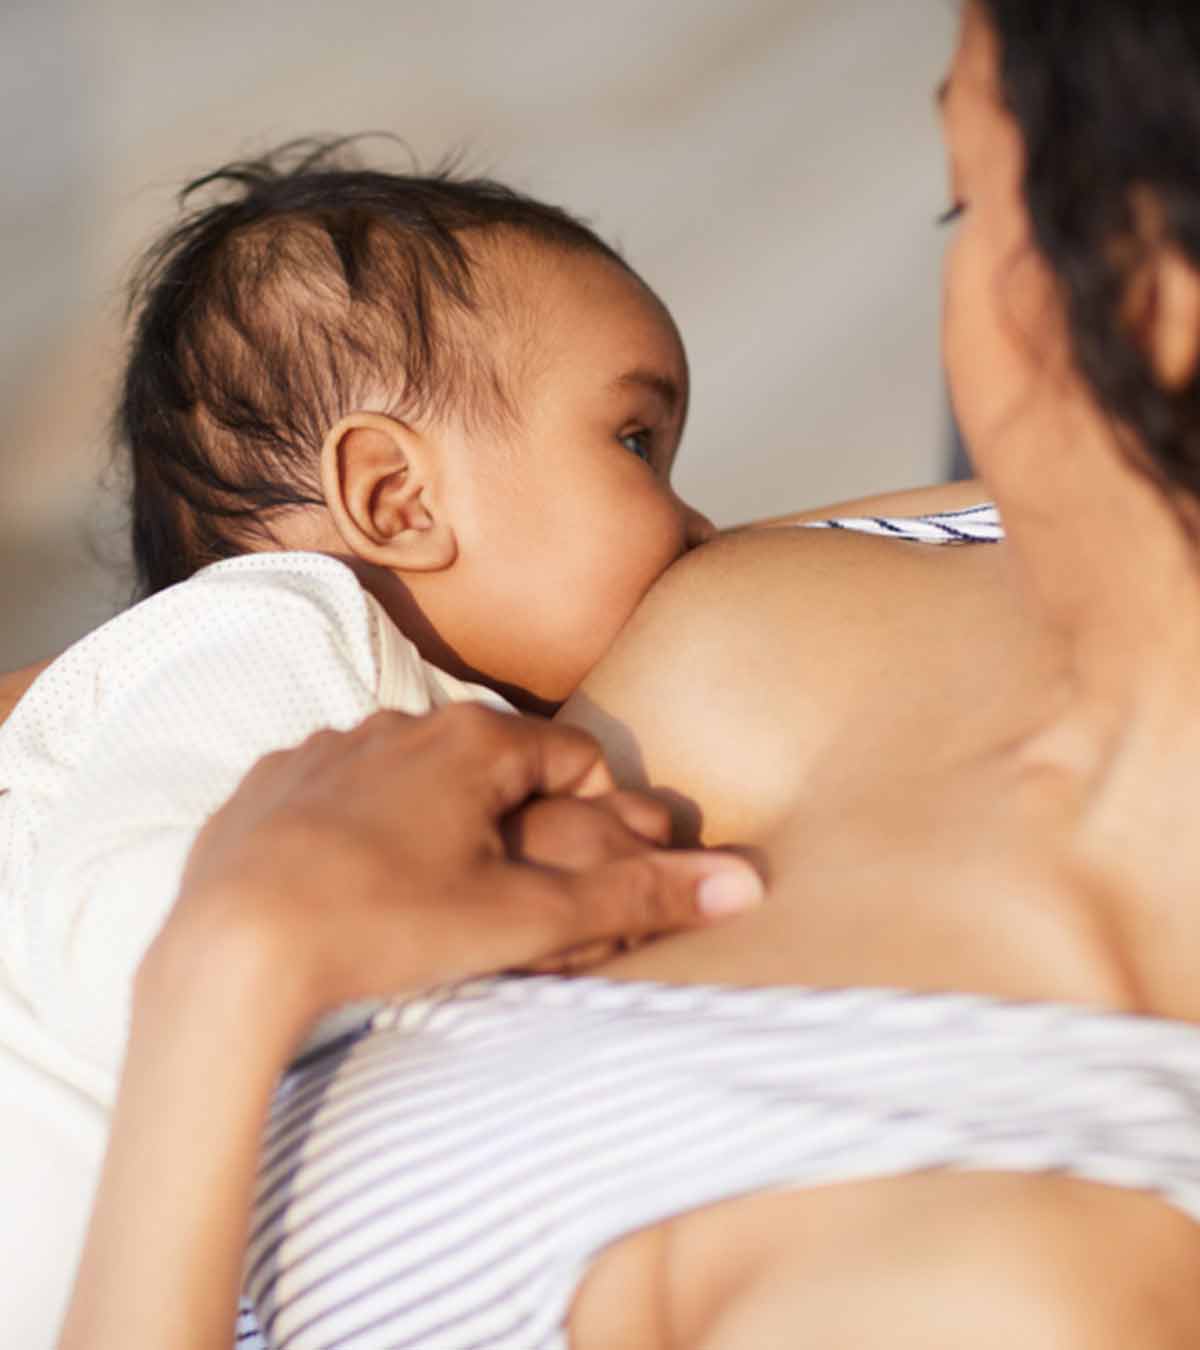 Breast Changes After Breastfeeding